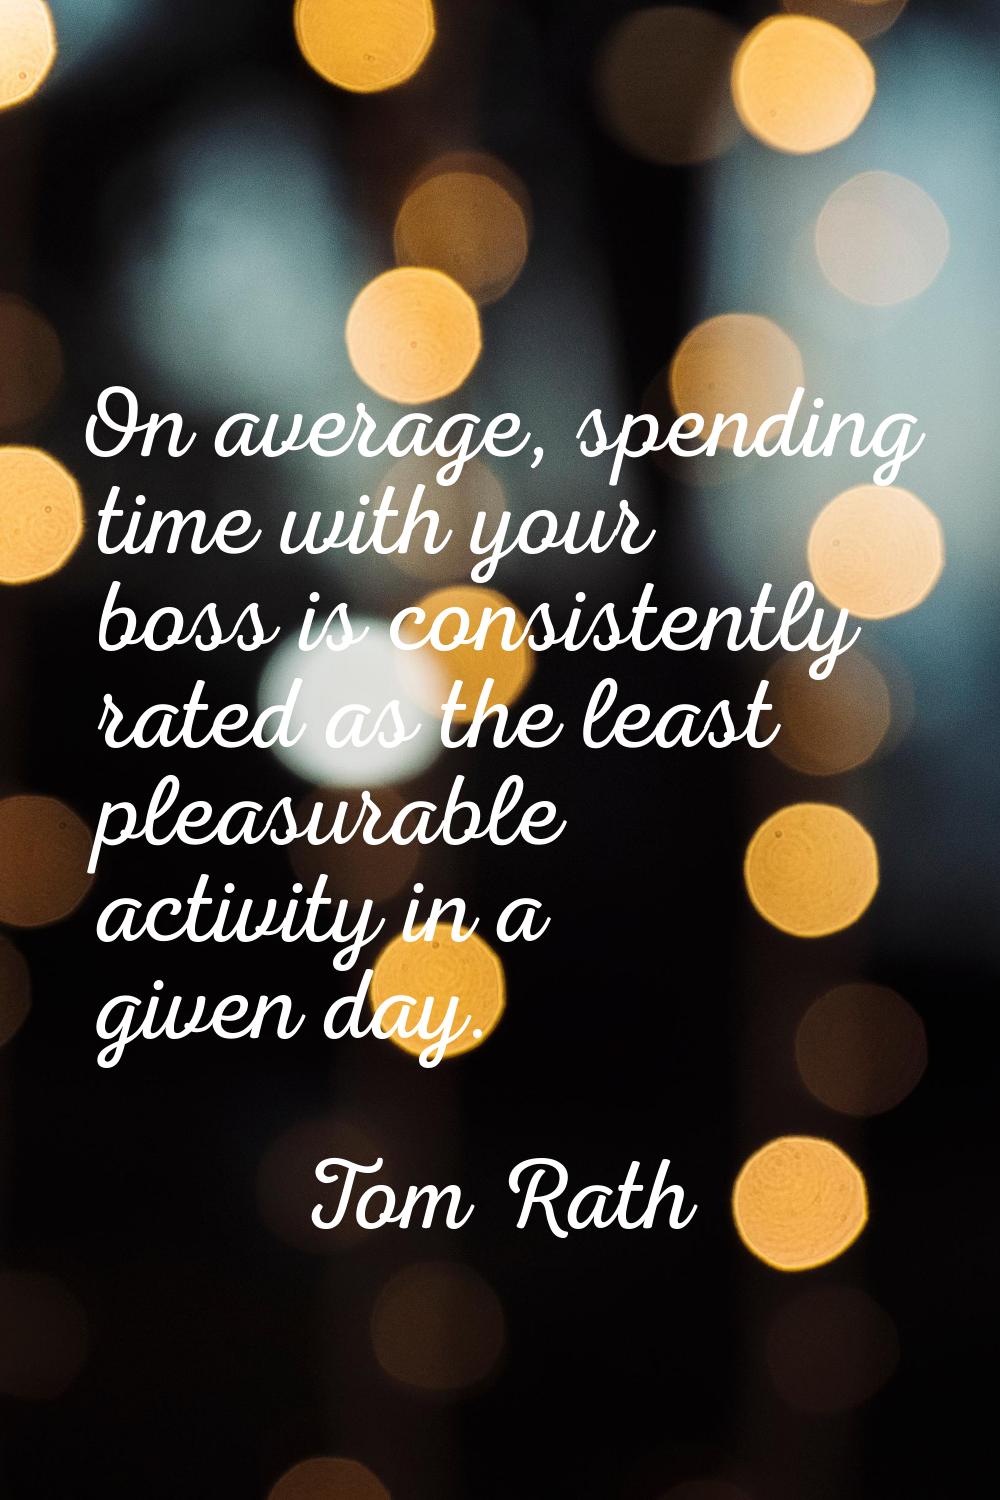 On average, spending time with your boss is consistently rated as the least pleasurable activity in